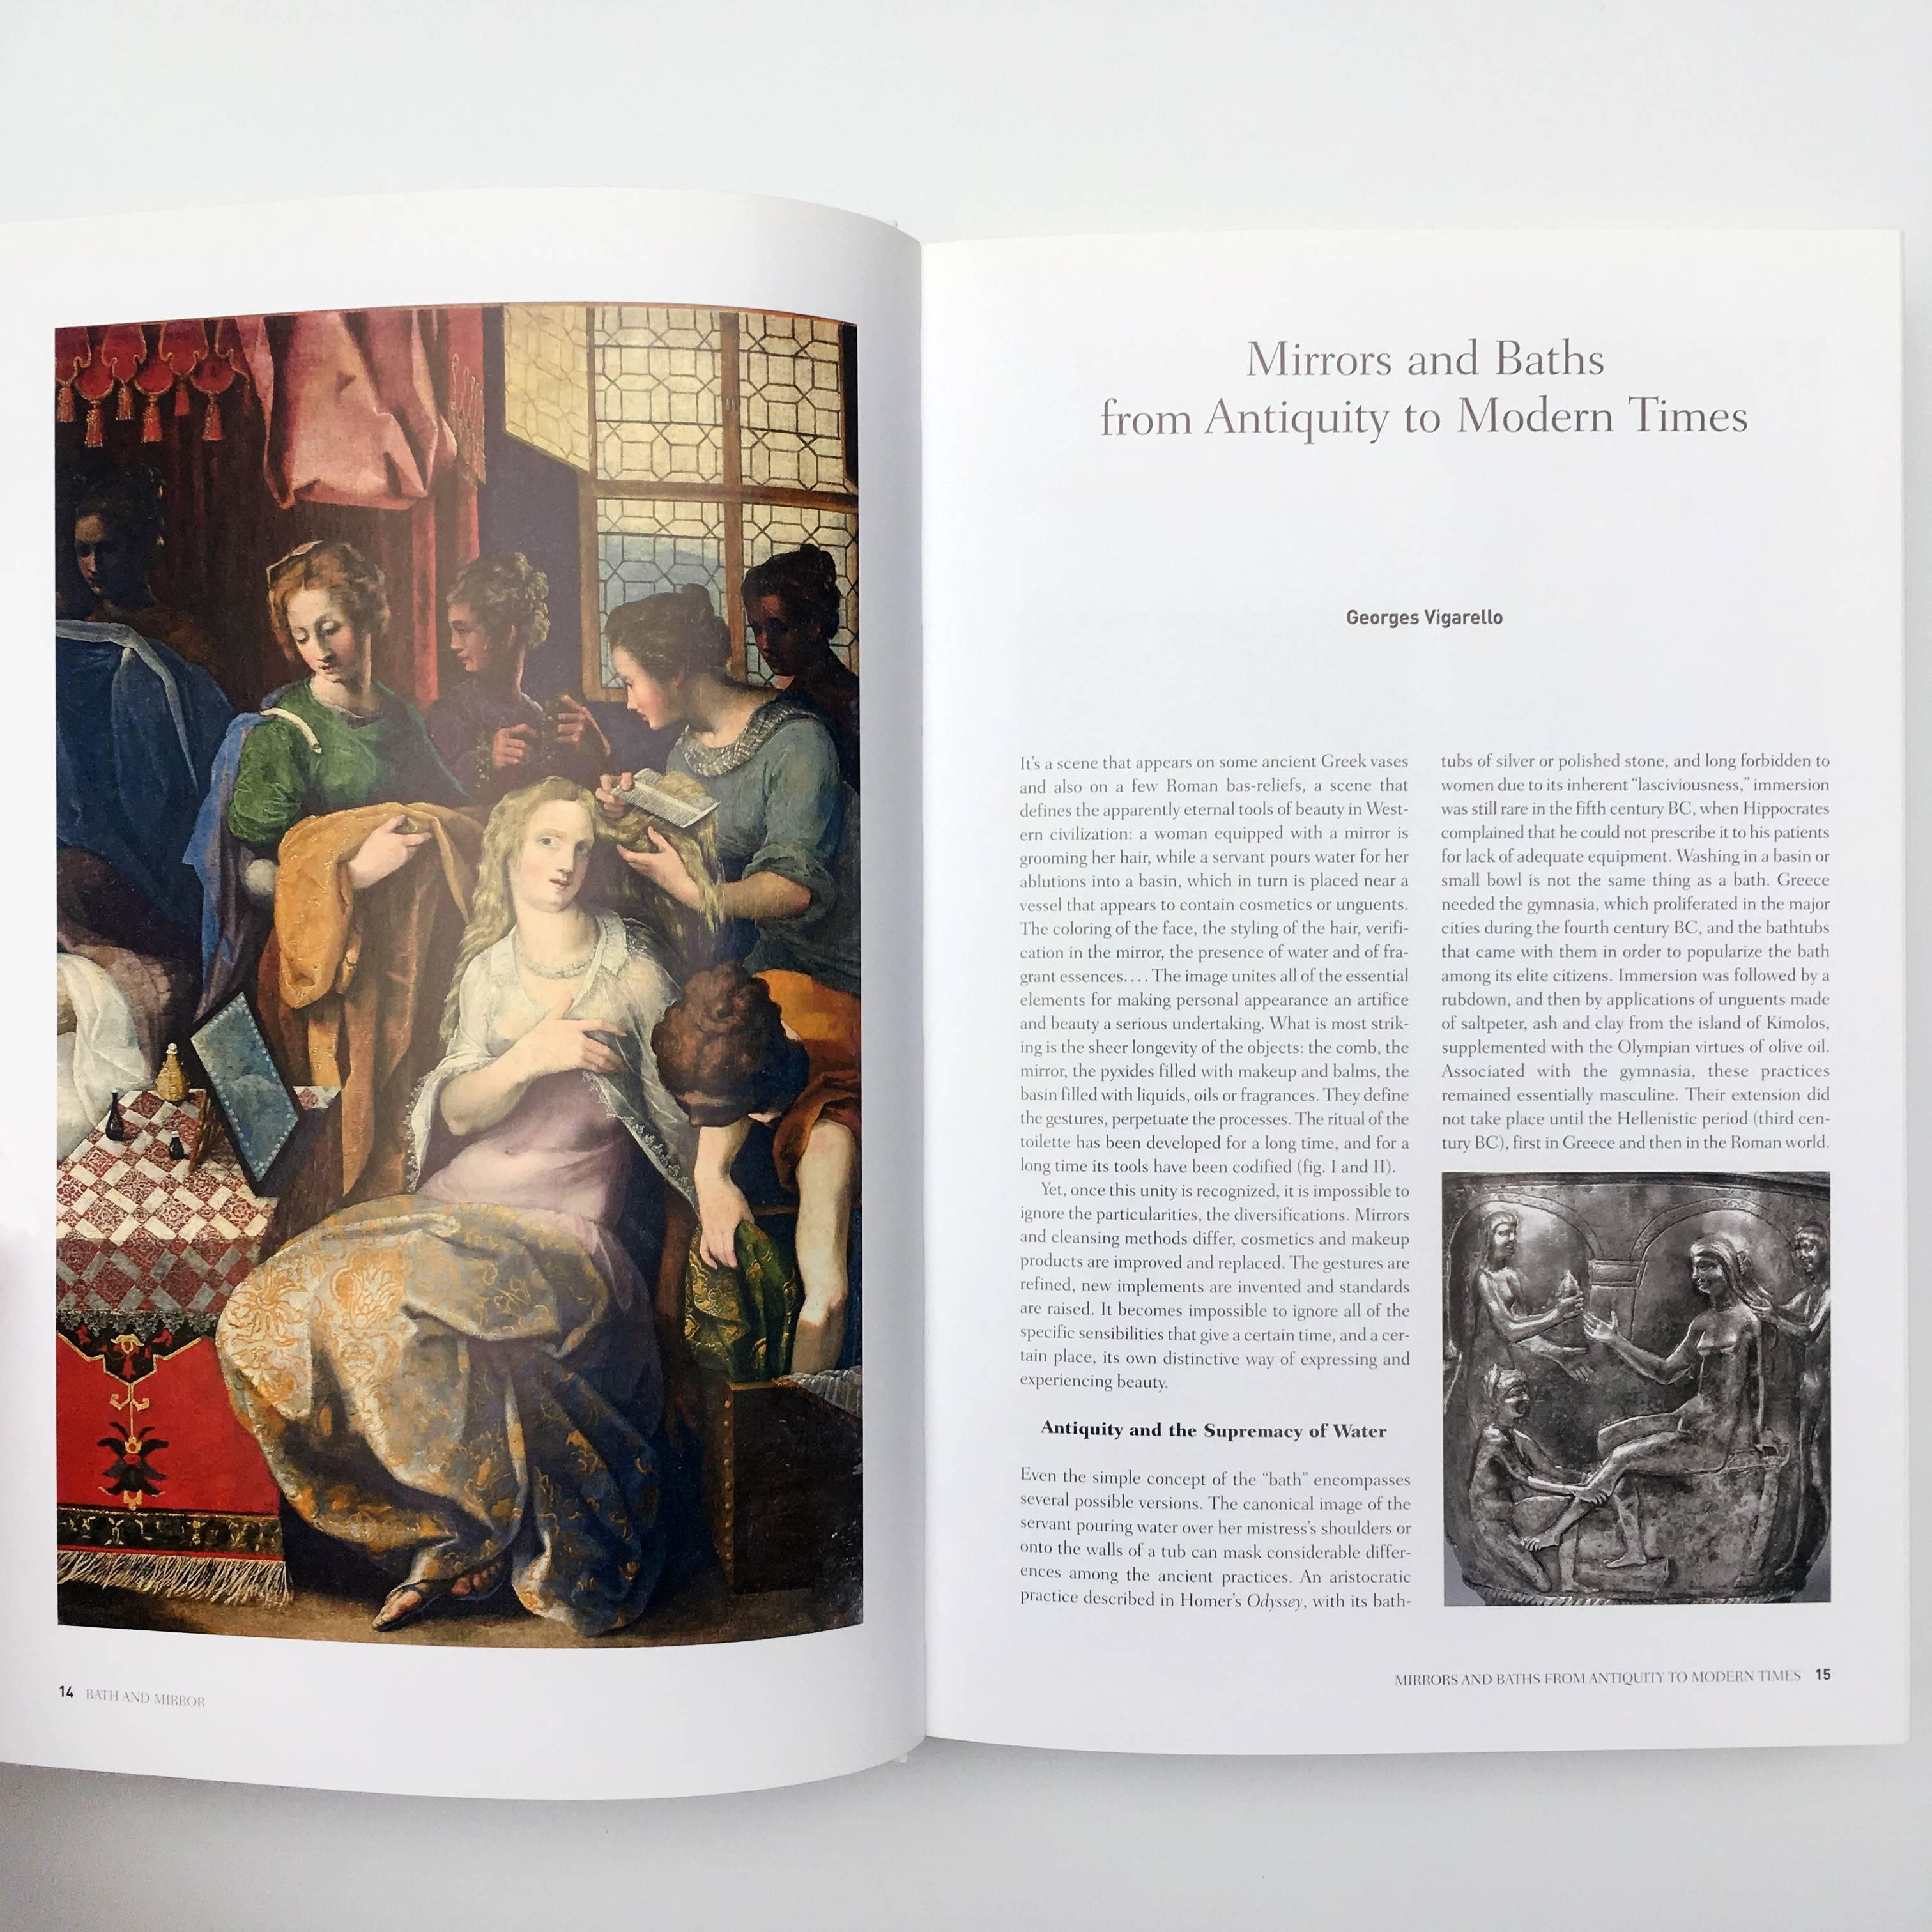 First edition, published by Gallimard, 2009

Published to accompany an exhibition of the same title, ‘Bath & Mirror: Beauty Care and Cosmetics from Antiquity to the Renaissance’, this book takes a very comprehensive look at the fascinating history